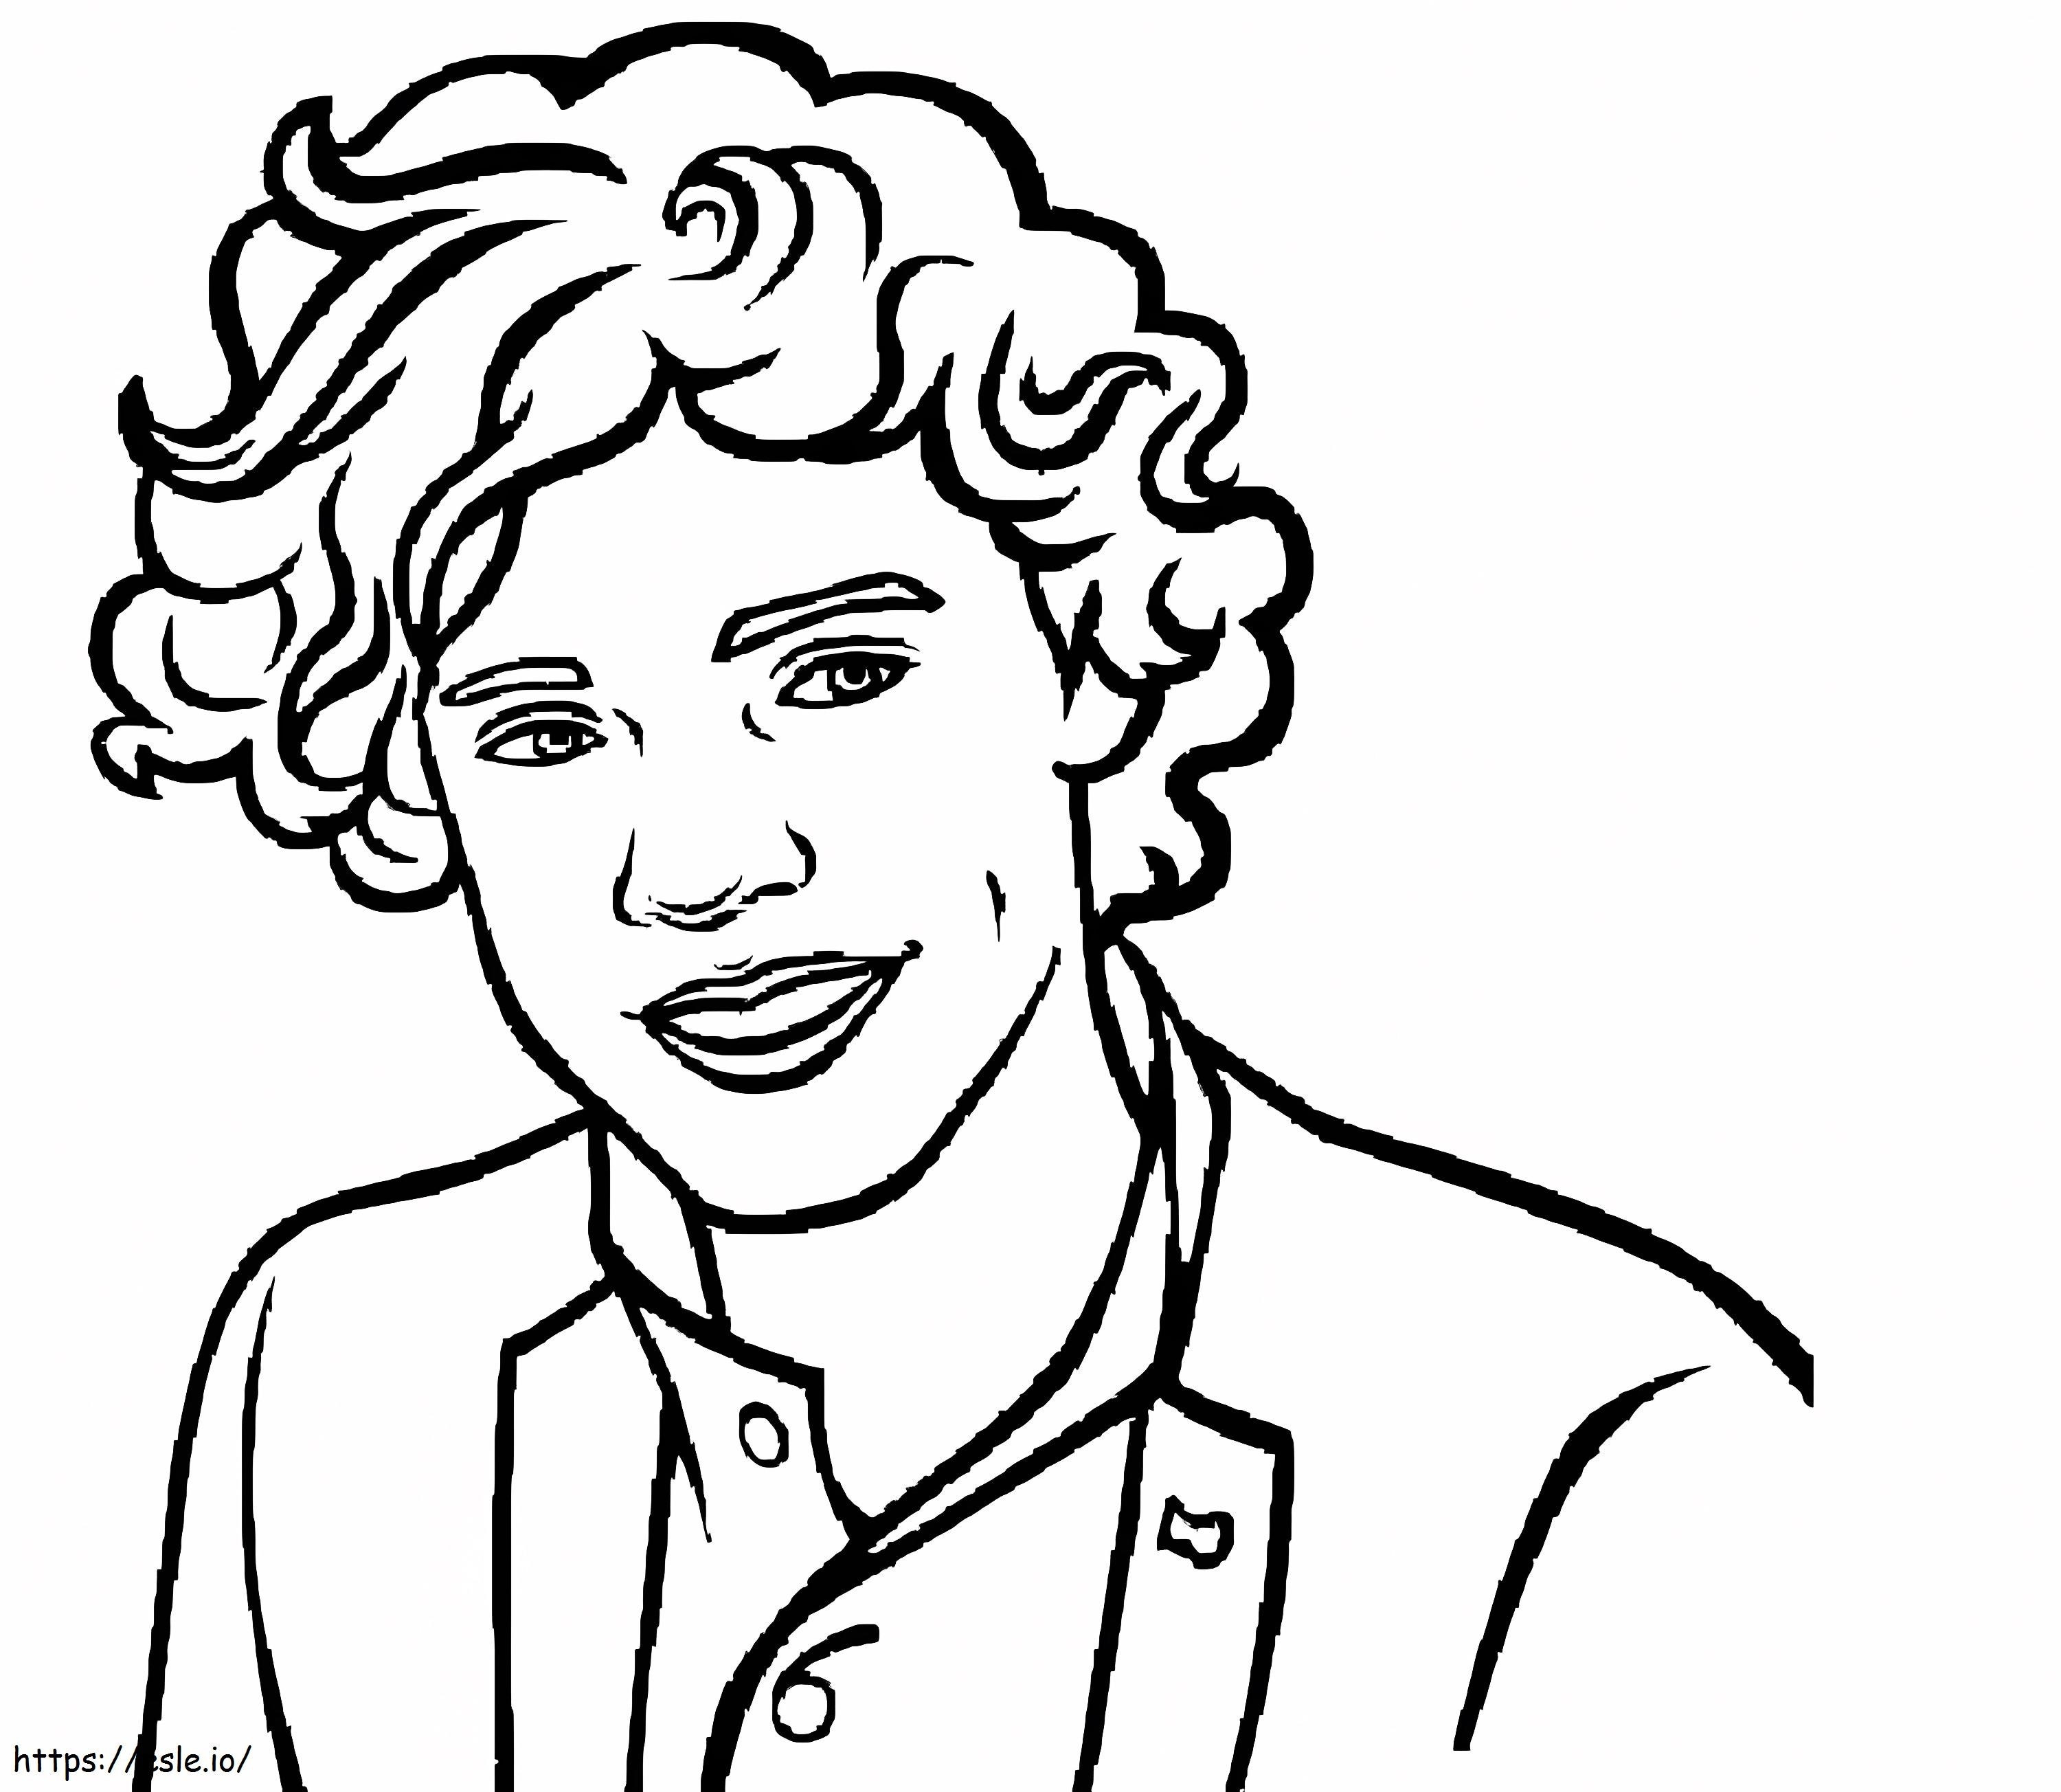 Harry Styles One Direction coloring page